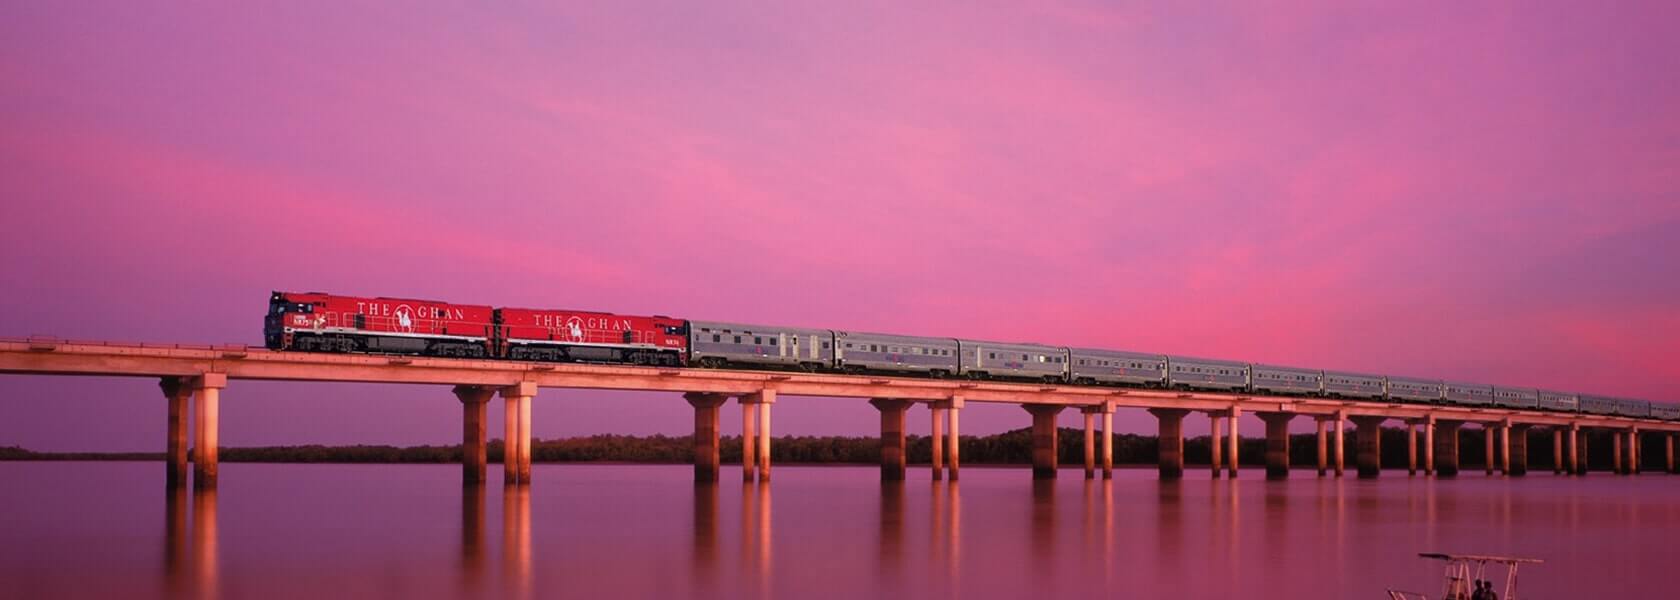 Ultimate Australia and the Ghan